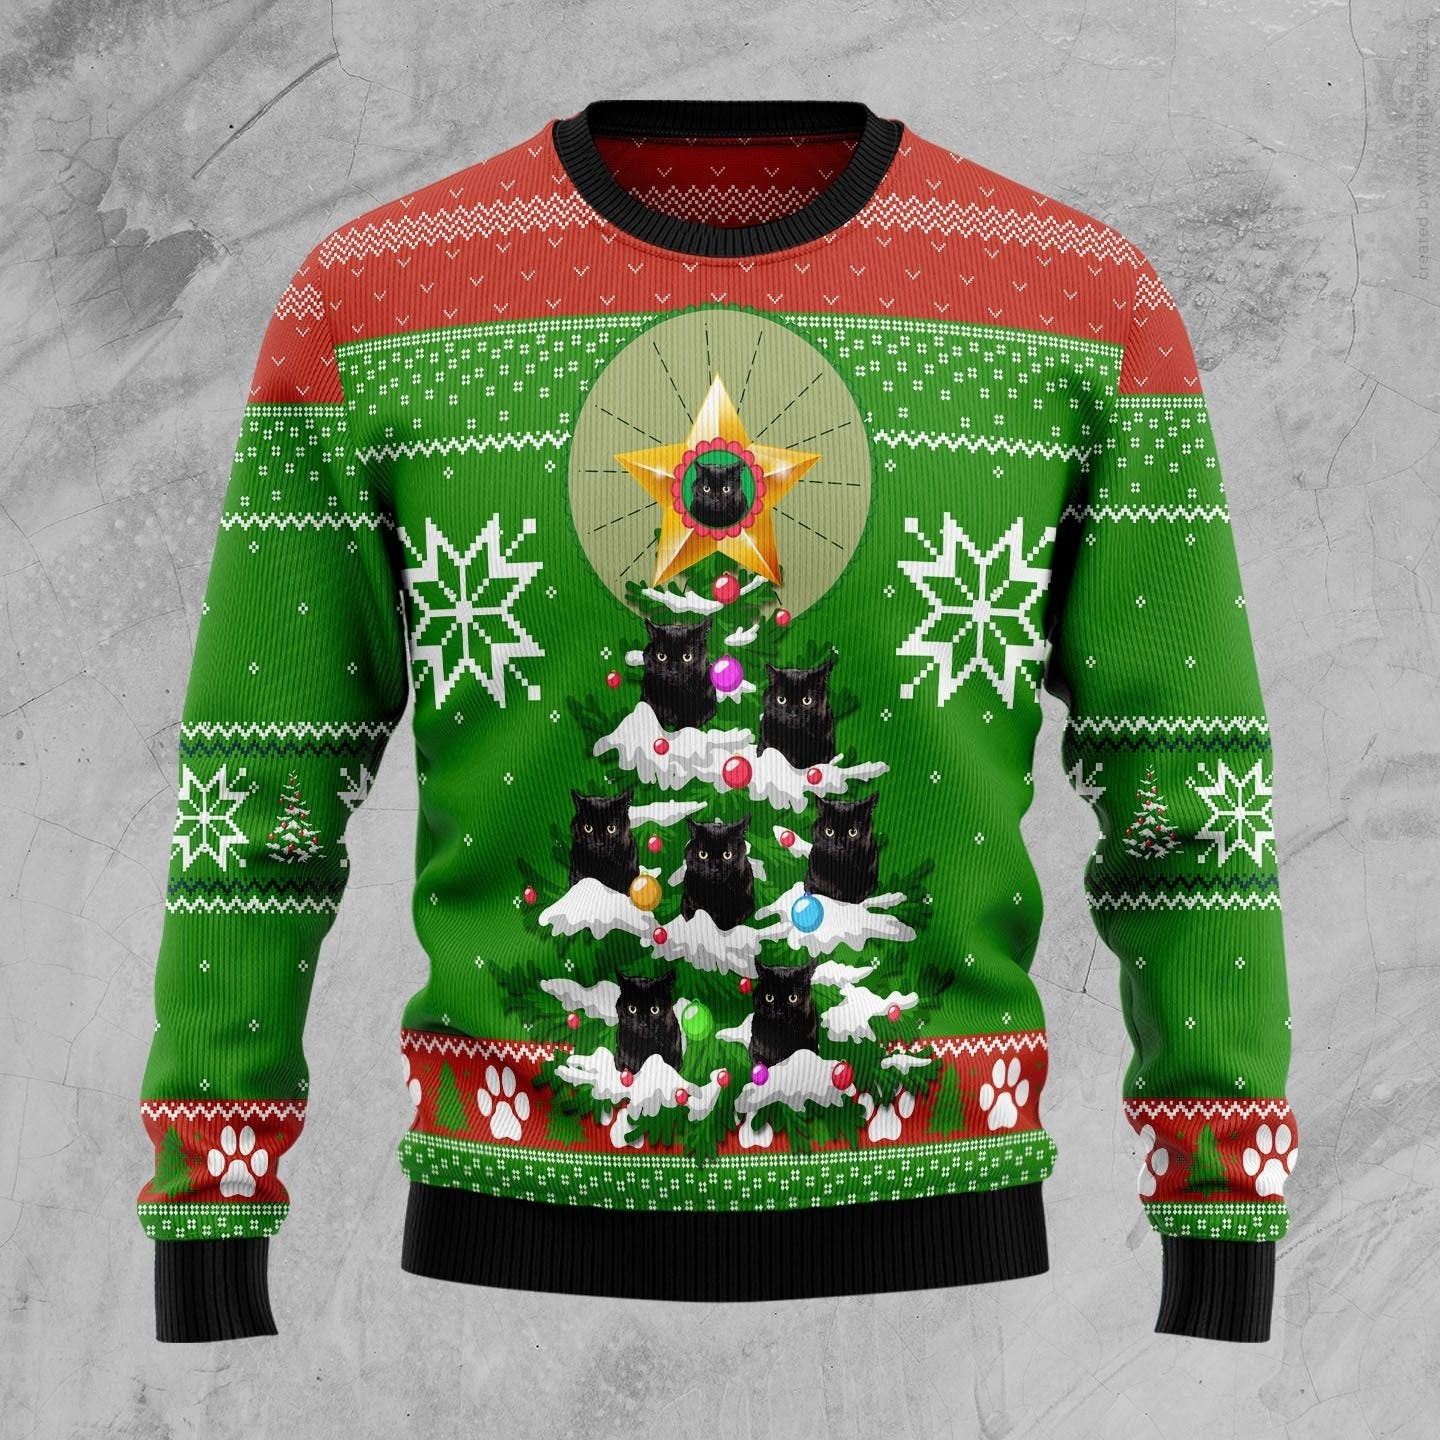 Black Cat Pine Ugly Christmas Sweater Ugly Sweater For Men Women, Holiday Sweater